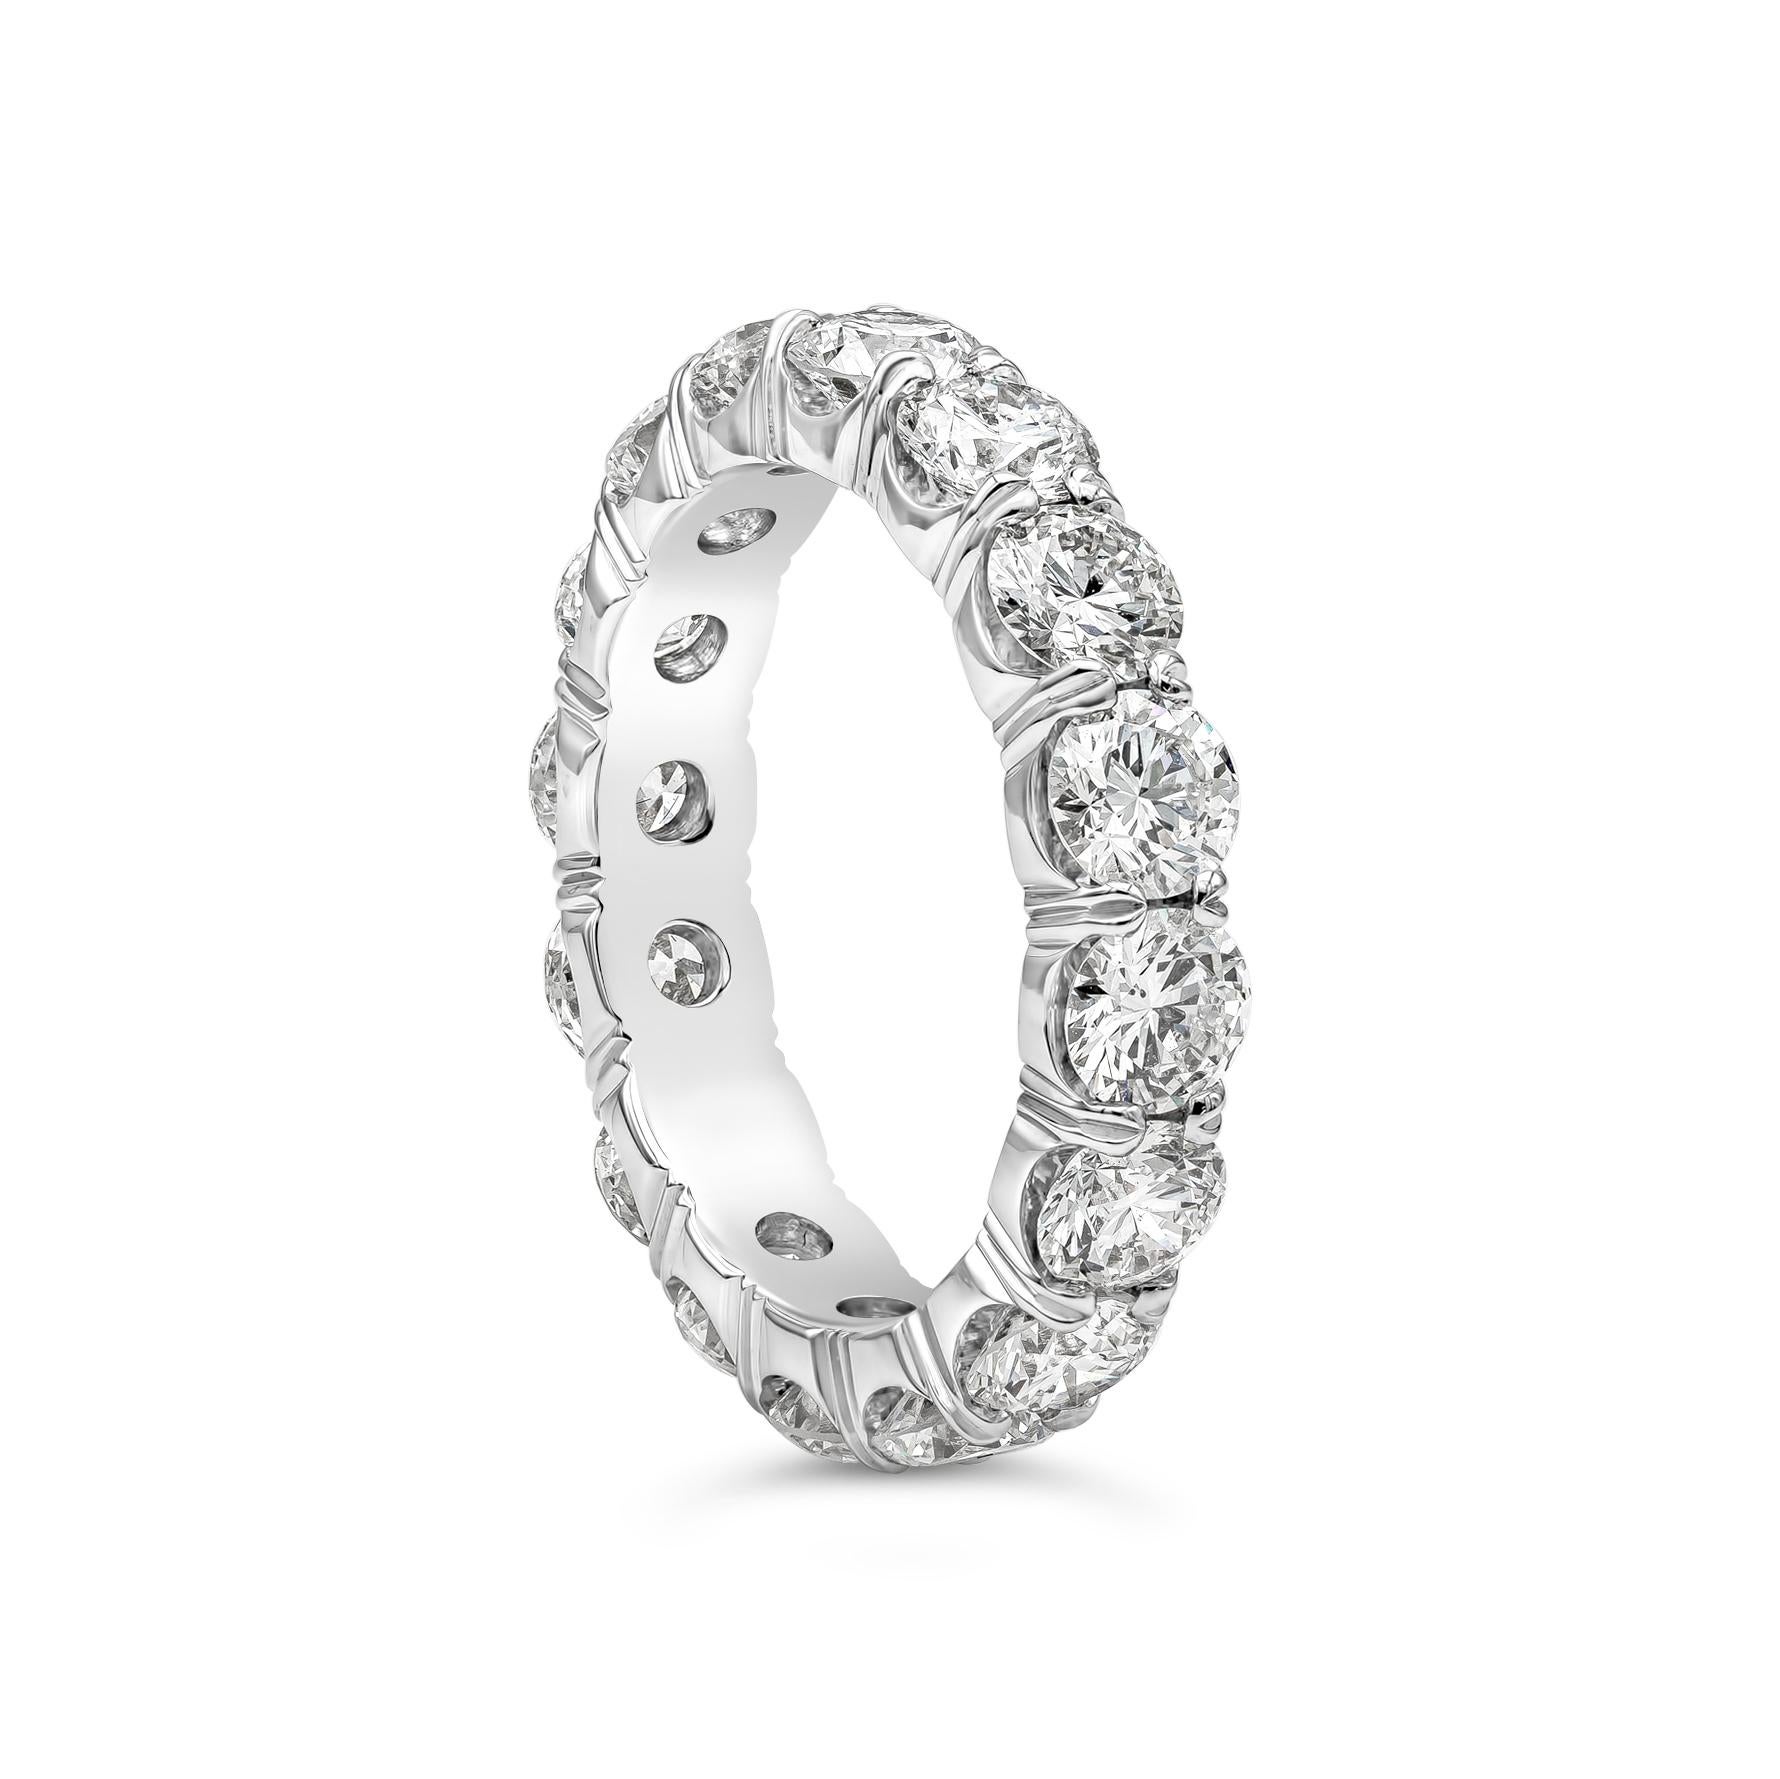 This timeless eternity wedding band ring features 16 brilliant round diamonds weighing 4.04 carats total, D-E Color and SI in Clarity. Set in a classic four prong setting, Made with Platinum, Size 6.5 US

Roman Malakov is a custom house,